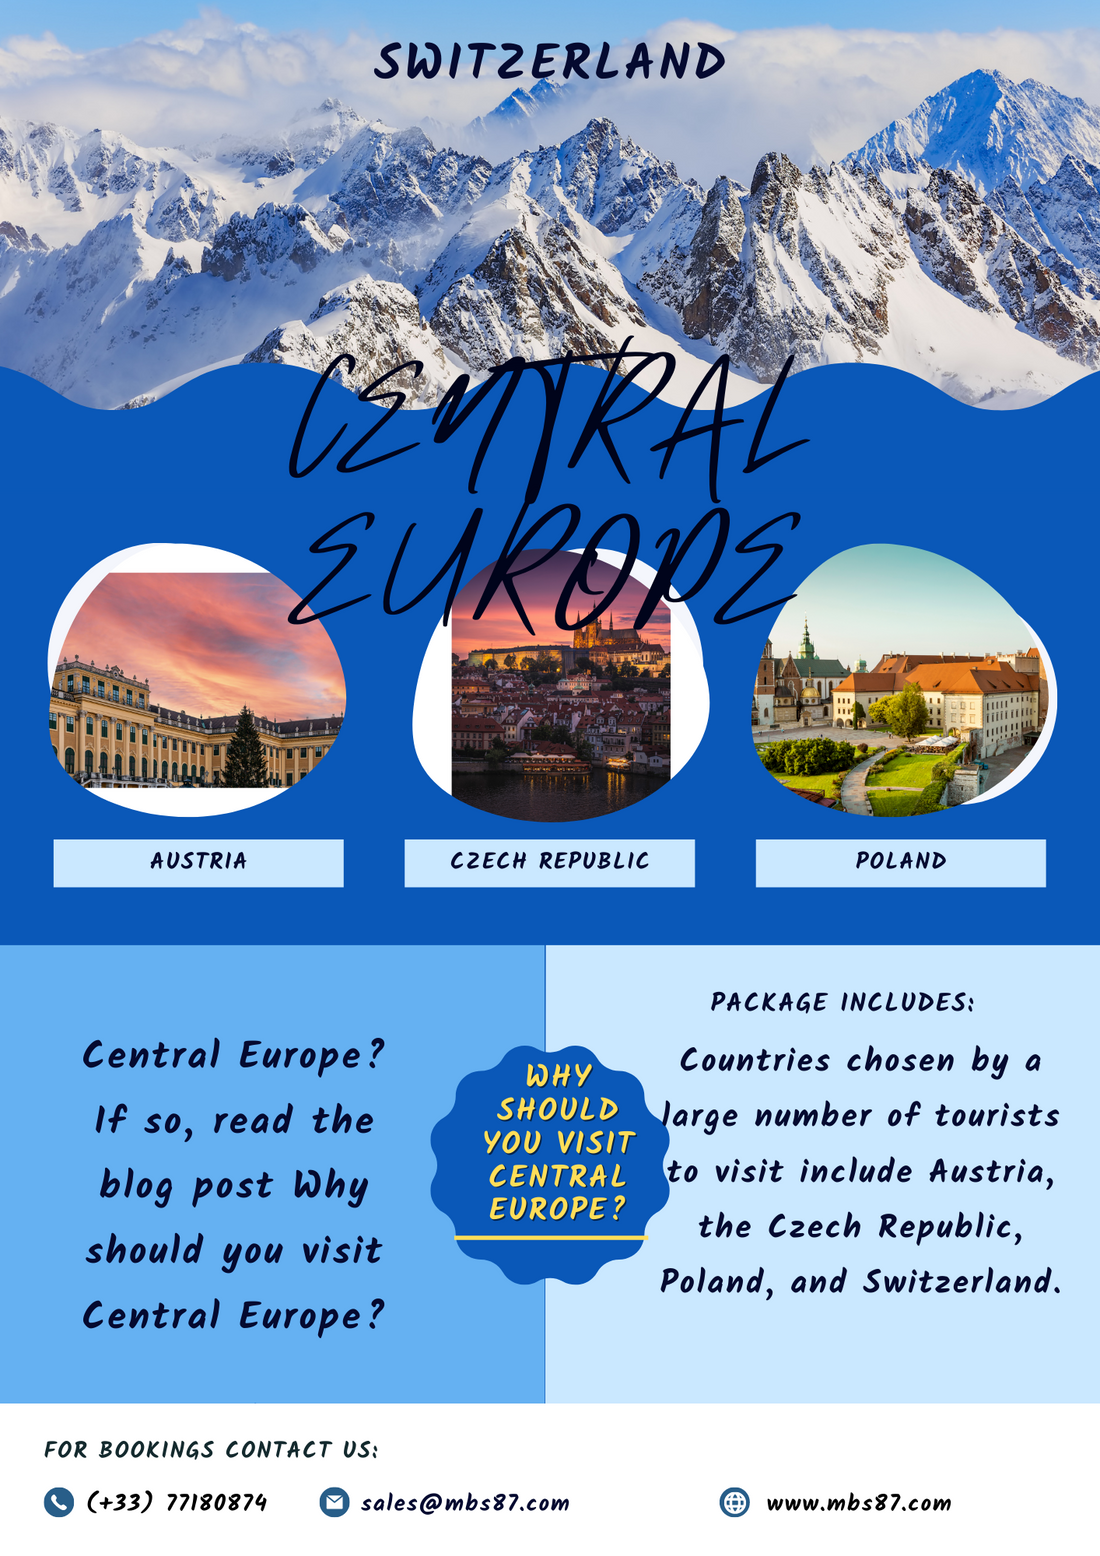 Why Should You Visit Central Europe?